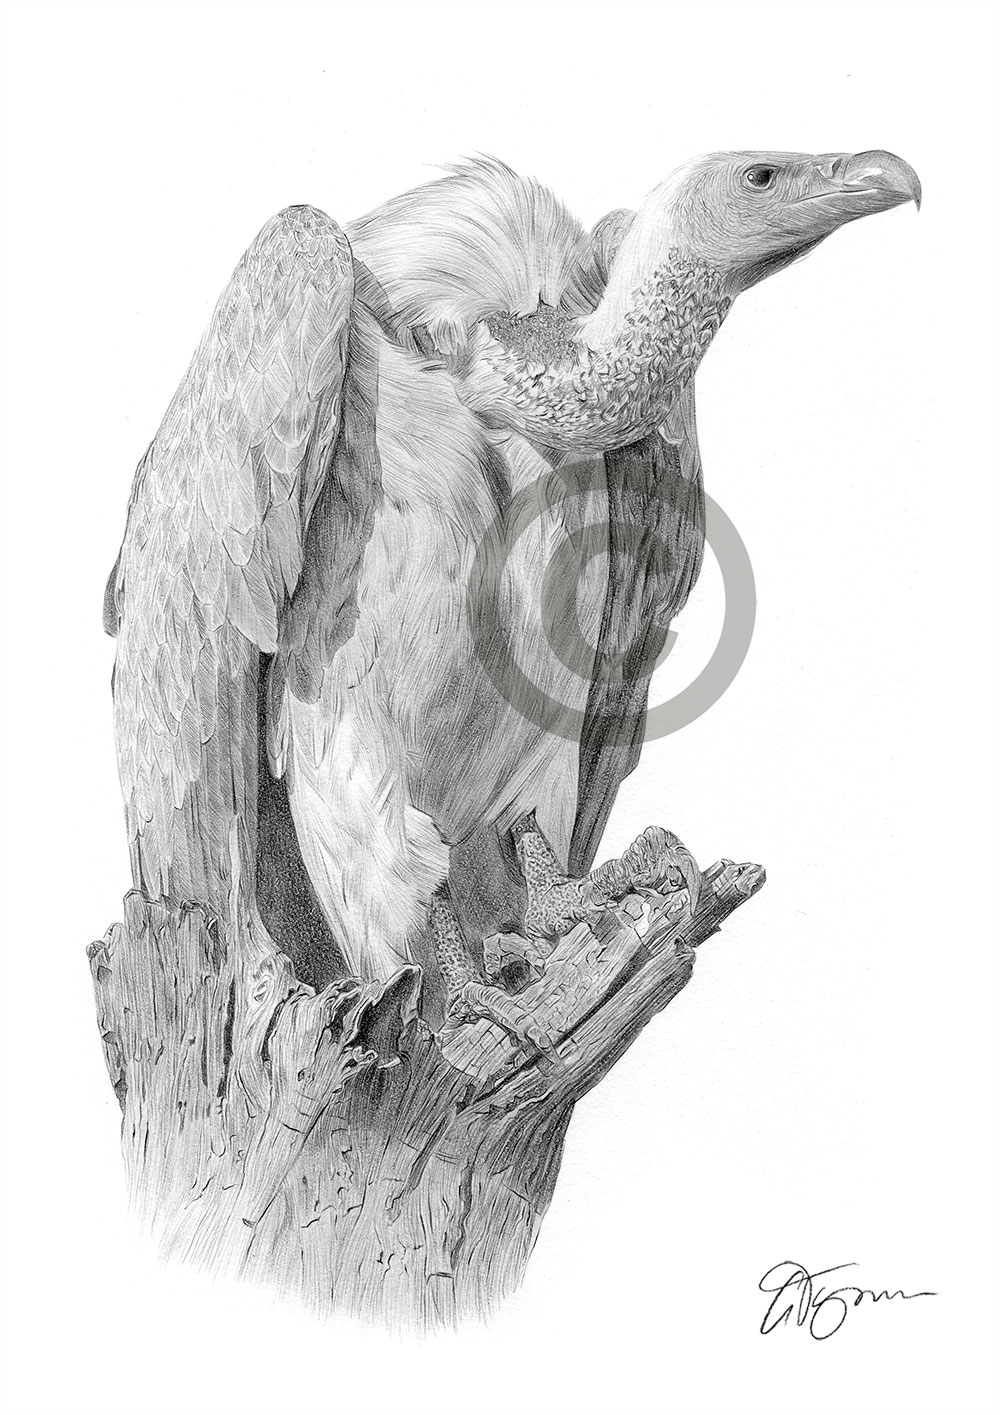 Pencil drawing of a vulture by artist Gary Tymon